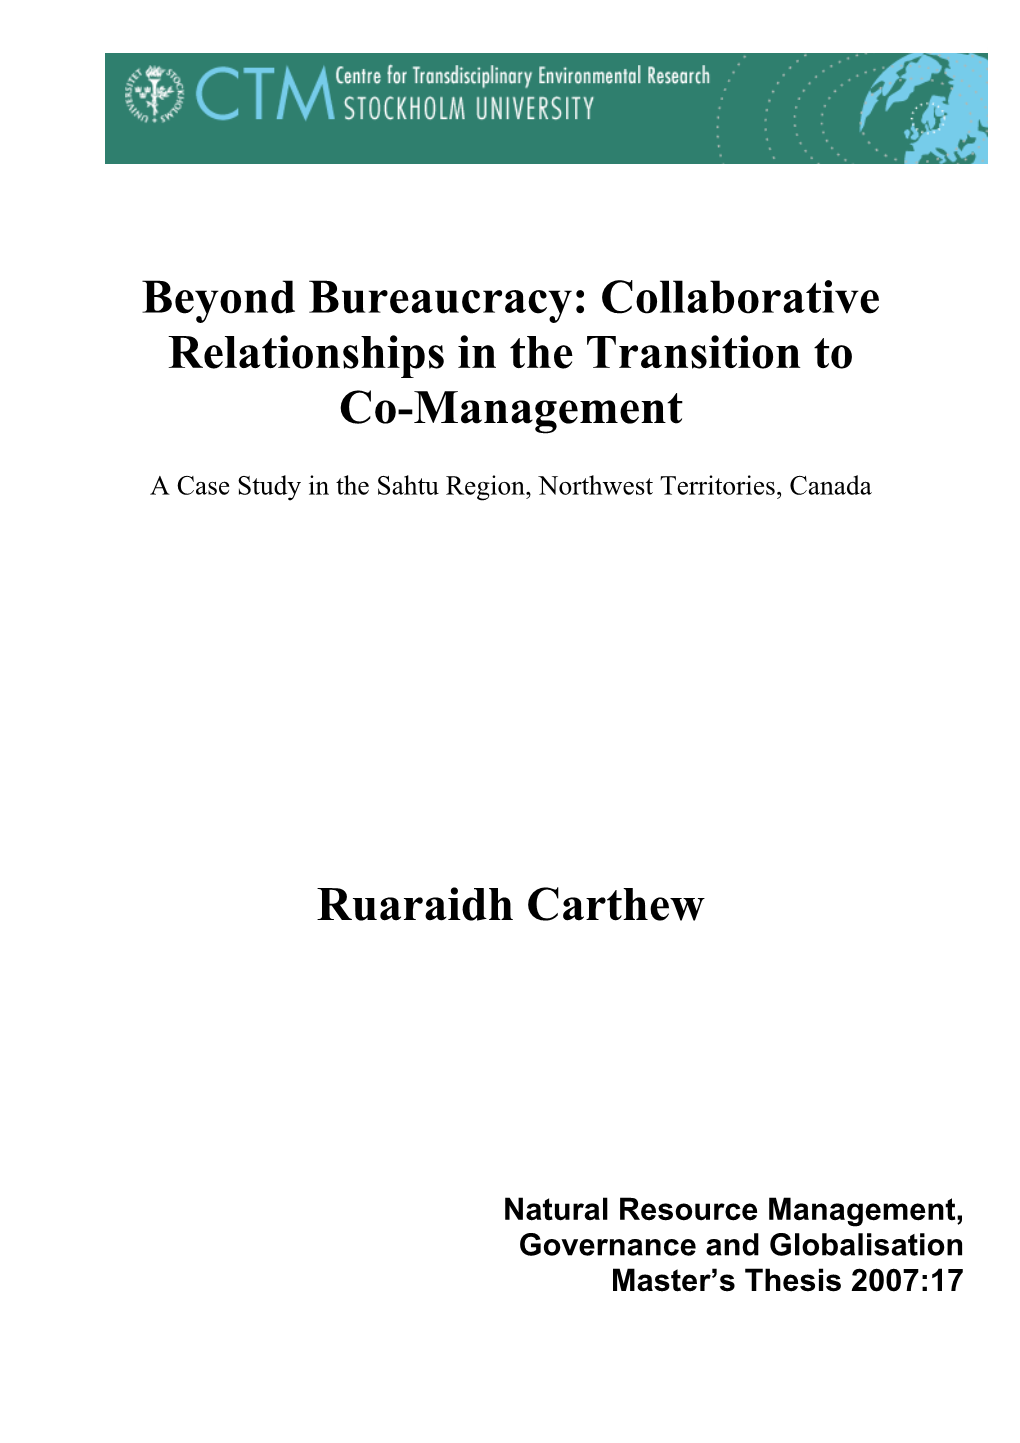 Beyond Bureaucracy: Collaborative Relationships in the Transition to Co-Management